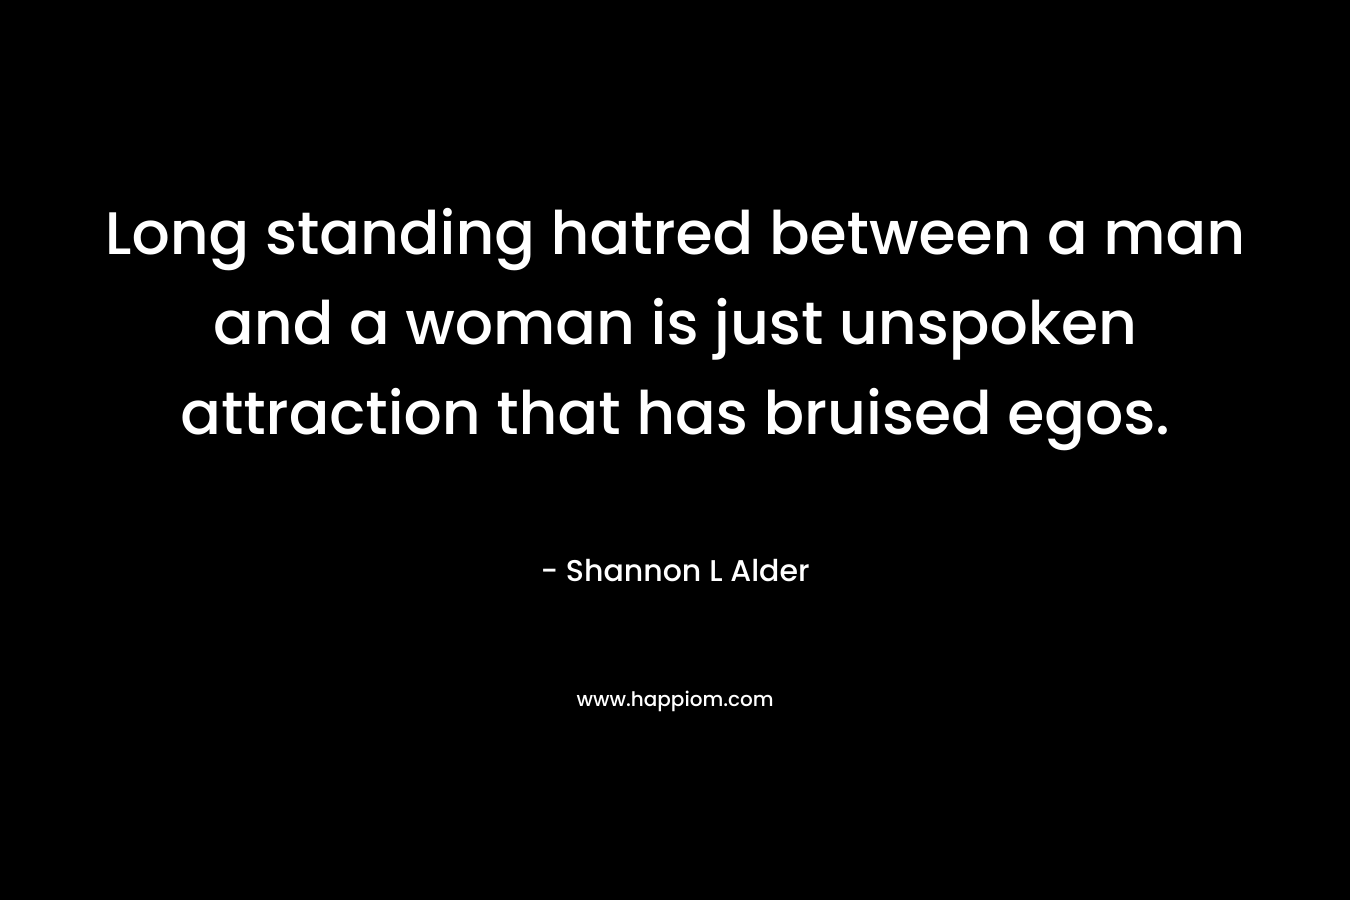 Long standing hatred between a man and a woman is just unspoken attraction that has bruised egos. – Shannon L Alder